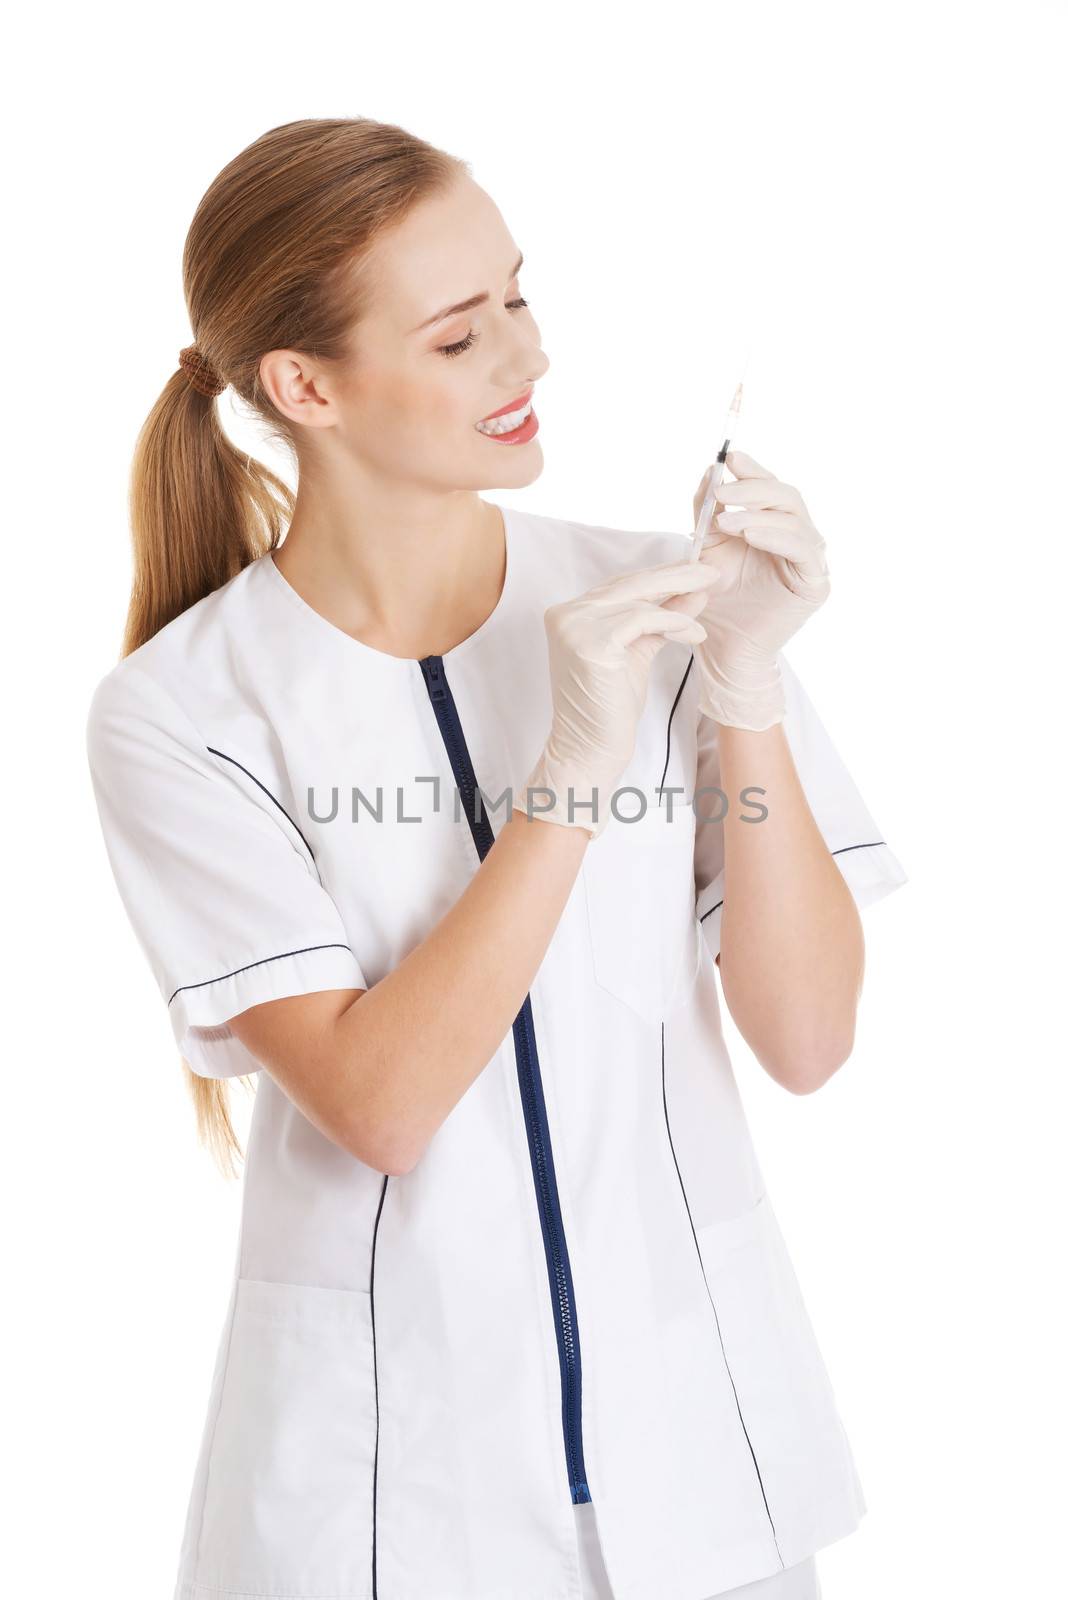 Beautiful young nurse or doctor with needle, shot ready to apply by BDS